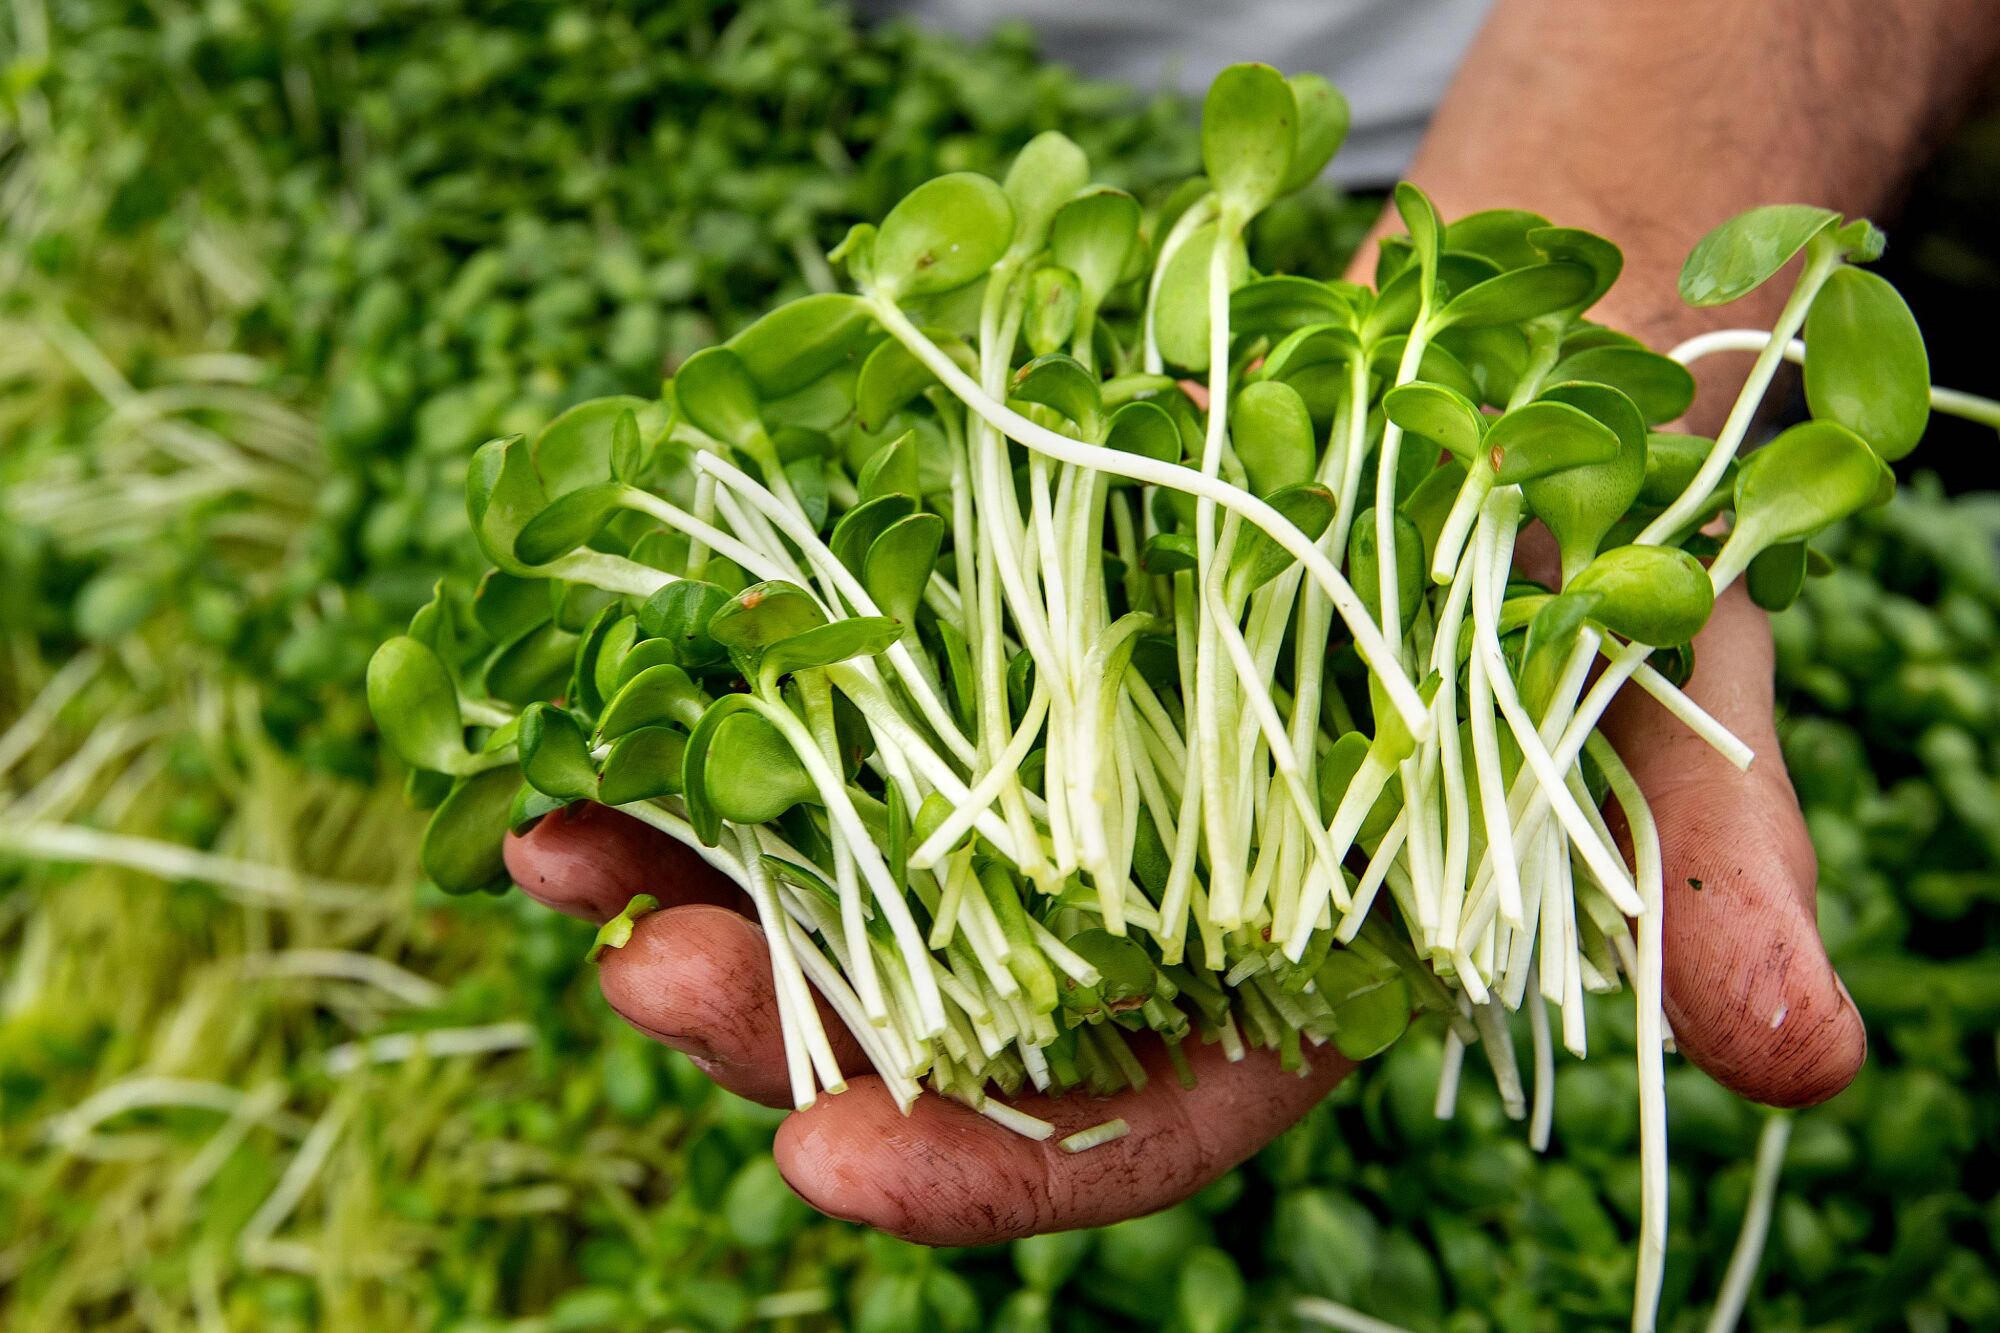 A hand holding out freshly harvested sunflower sprouts.